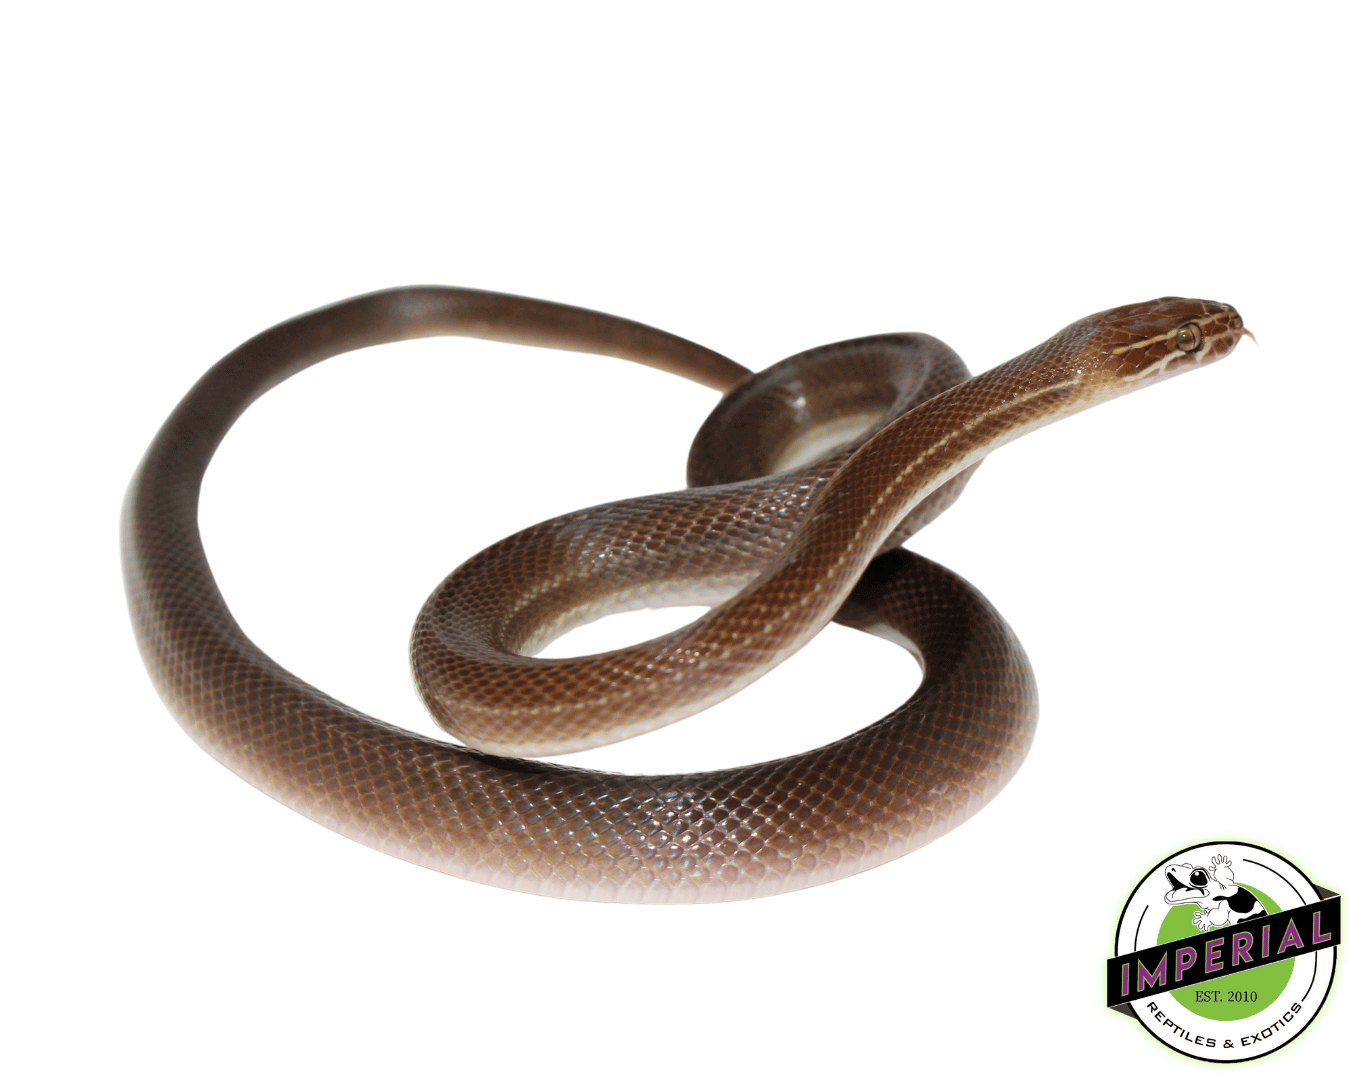 african brown house snake for sale, buy reptiles online